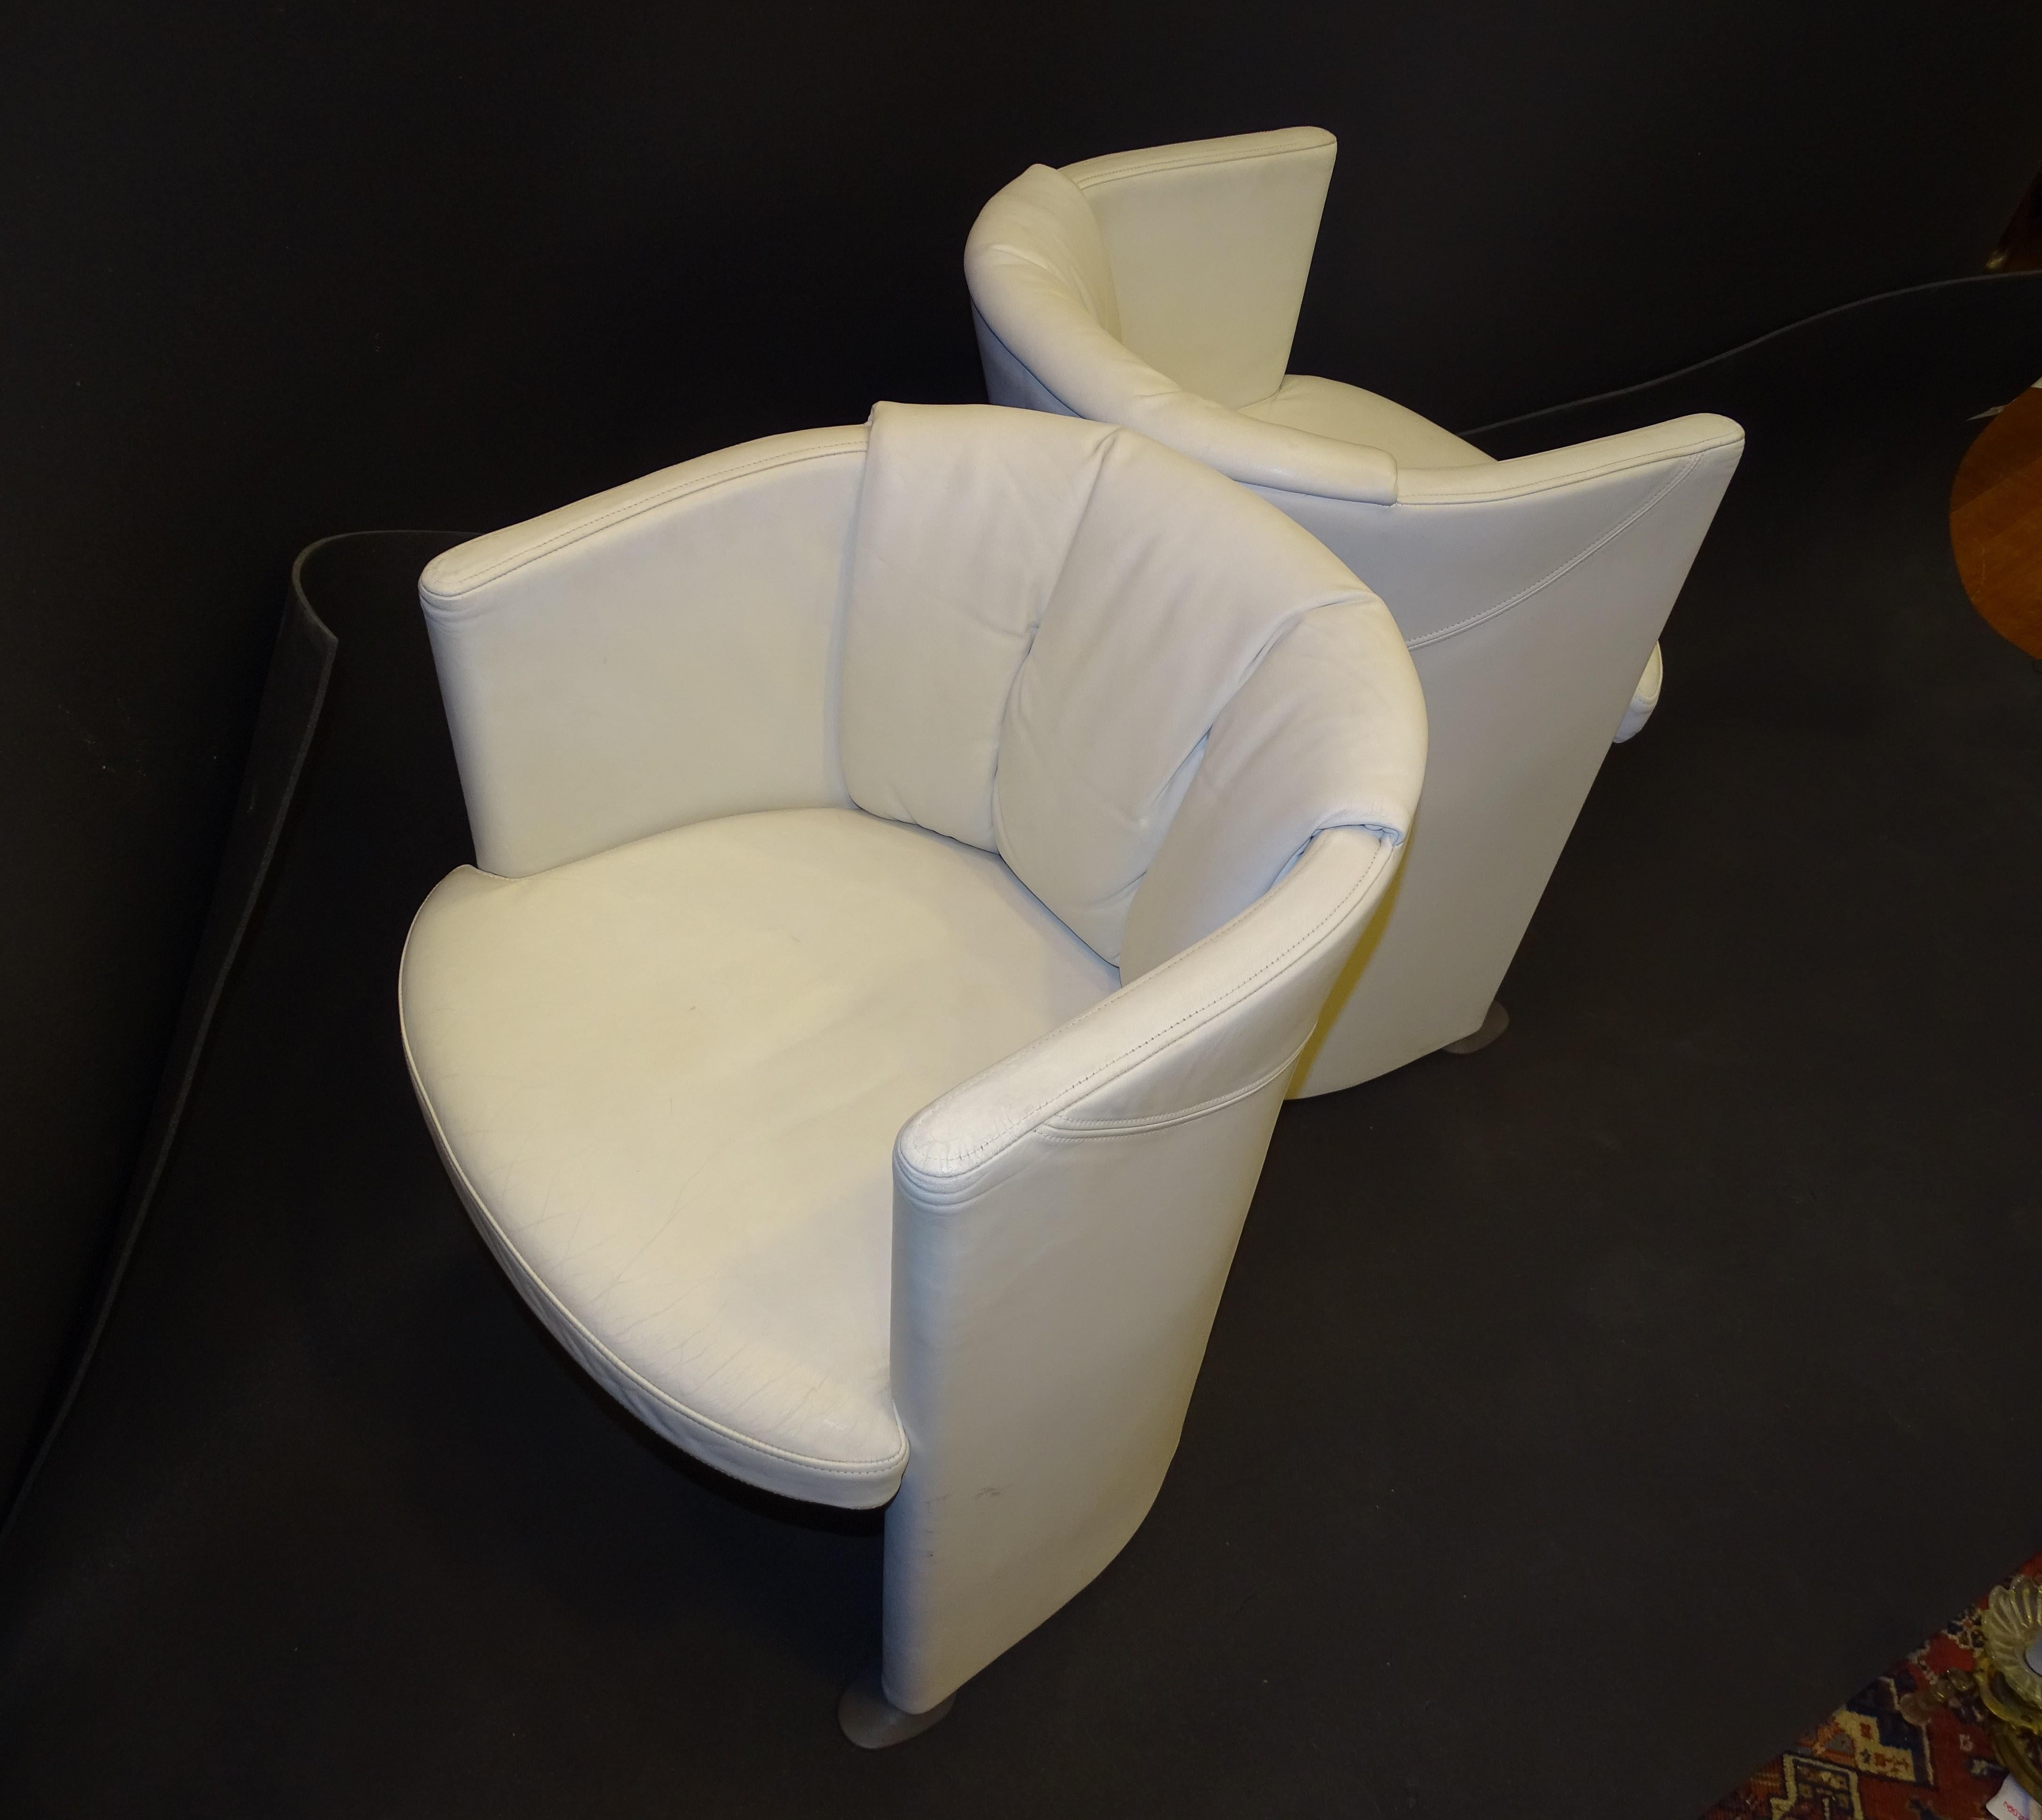 70s Pair Artdeco German White Leather Armchairs, Steel In Good Condition For Sale In Valladolid, ES